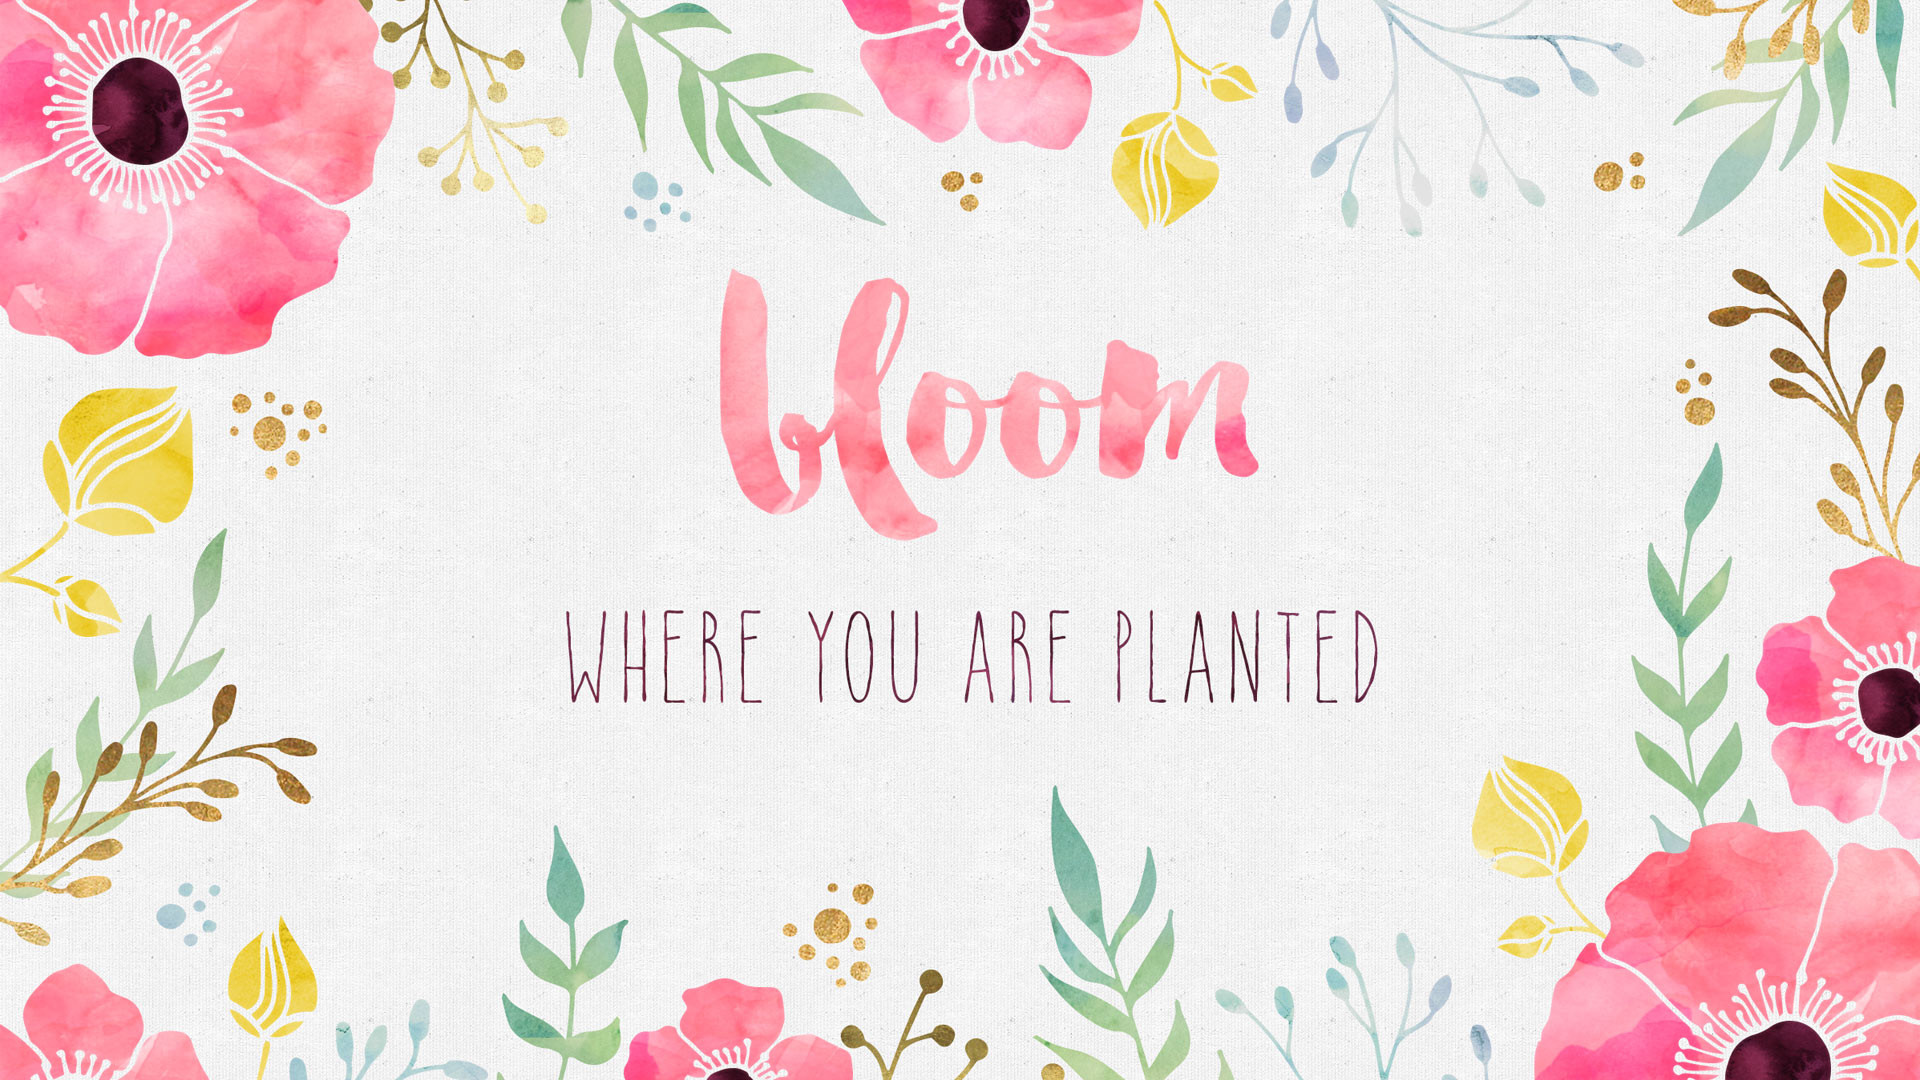 1920x1080 Free Desktop Wallpaper – Bloom Where you are Planted